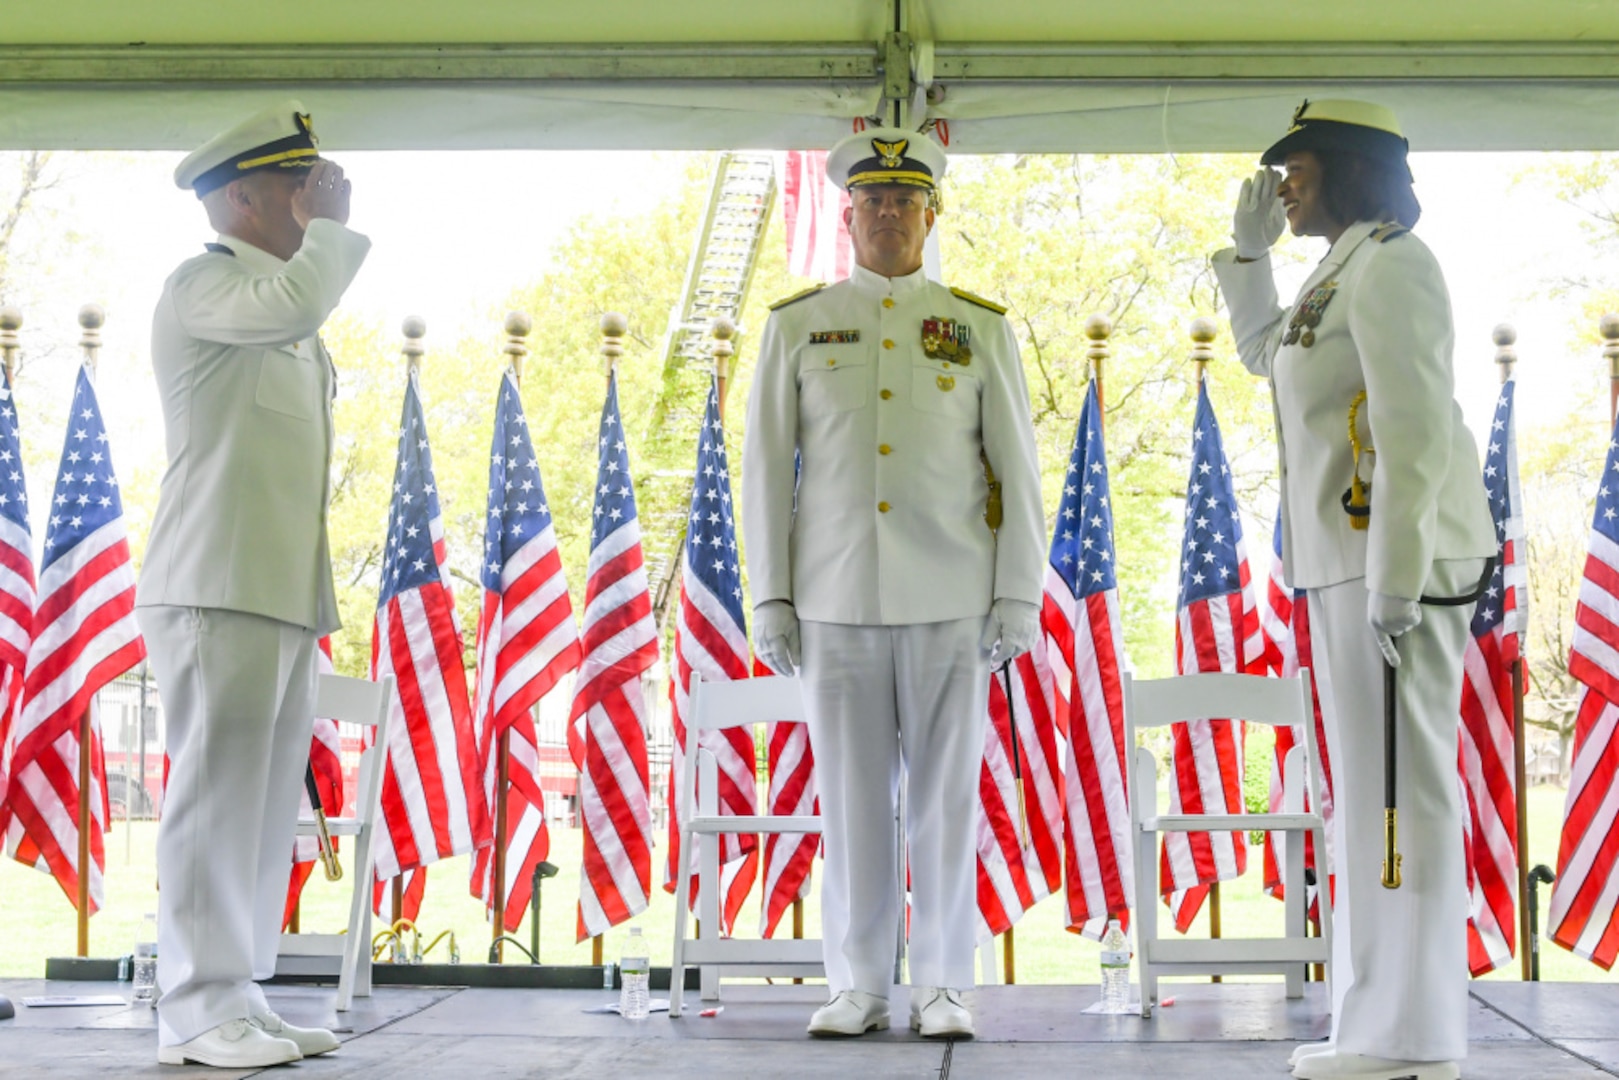 Capt. Zeita Merchant relieved Capt. Jason Tama as the commanding officer of Coast Guard Sector New York during a change-of-command ceremony at Sector New York, May 7, 2021. A change-of-command ceremony is a time-honored tradition conducted before the assembled crew, as well as honored guests and dignitaries to formally demonstrate the continuity of the authority within a command. (U.S. Coast Guard photo by Petty Officer 3rd Class Ryan Schultz)